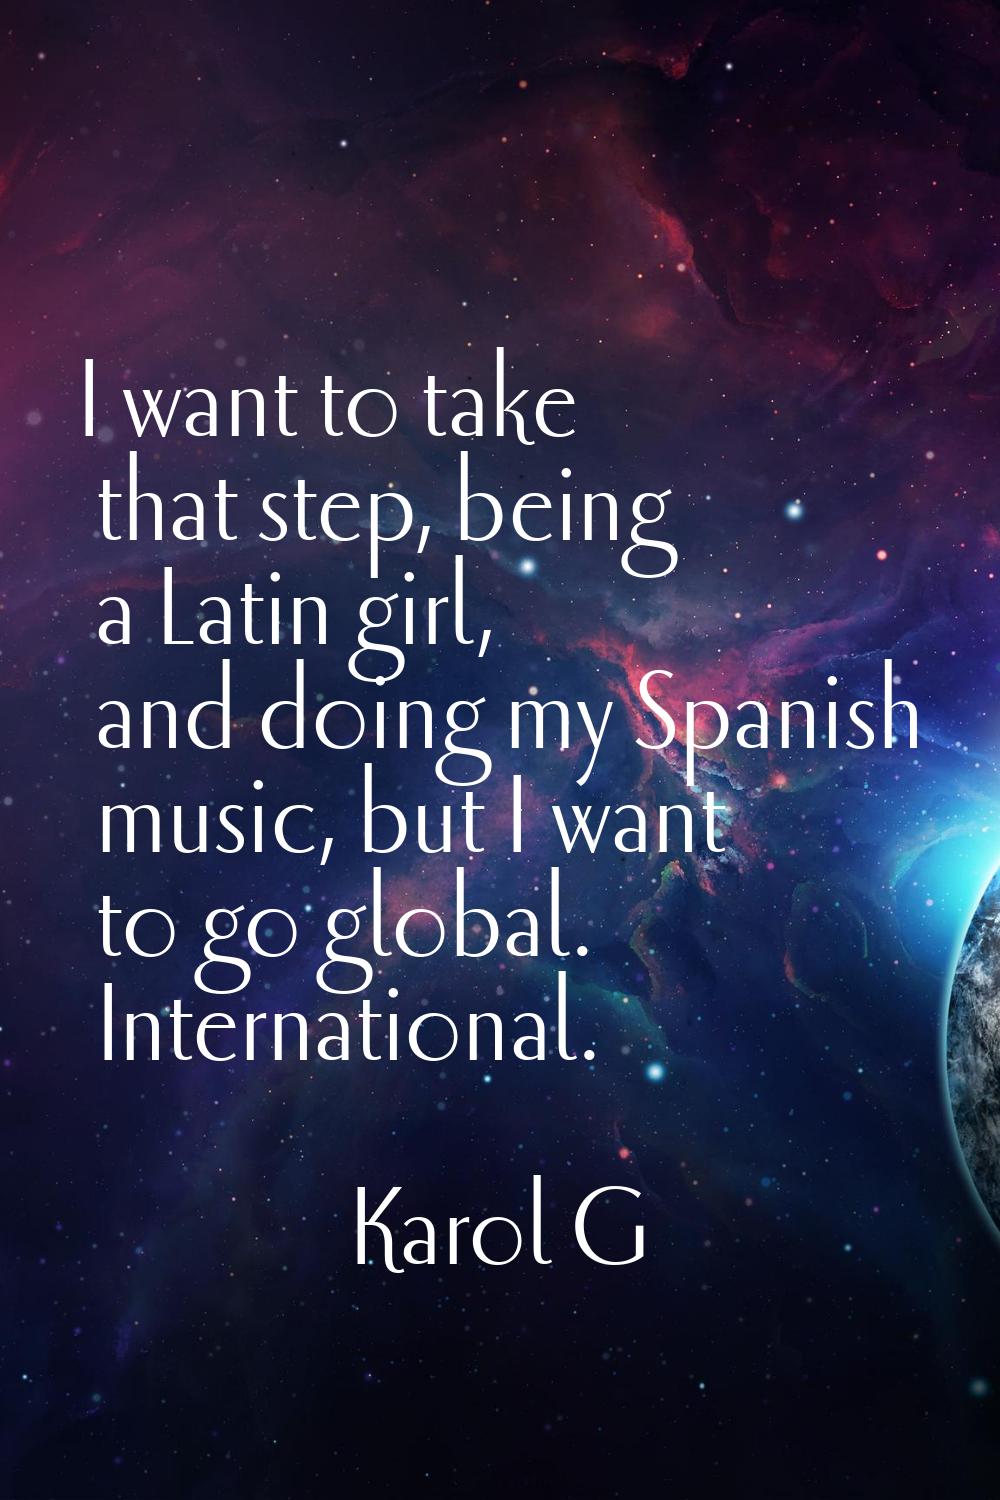 I want to take that step, being a Latin girl, and doing my Spanish music, but I want to go global. 